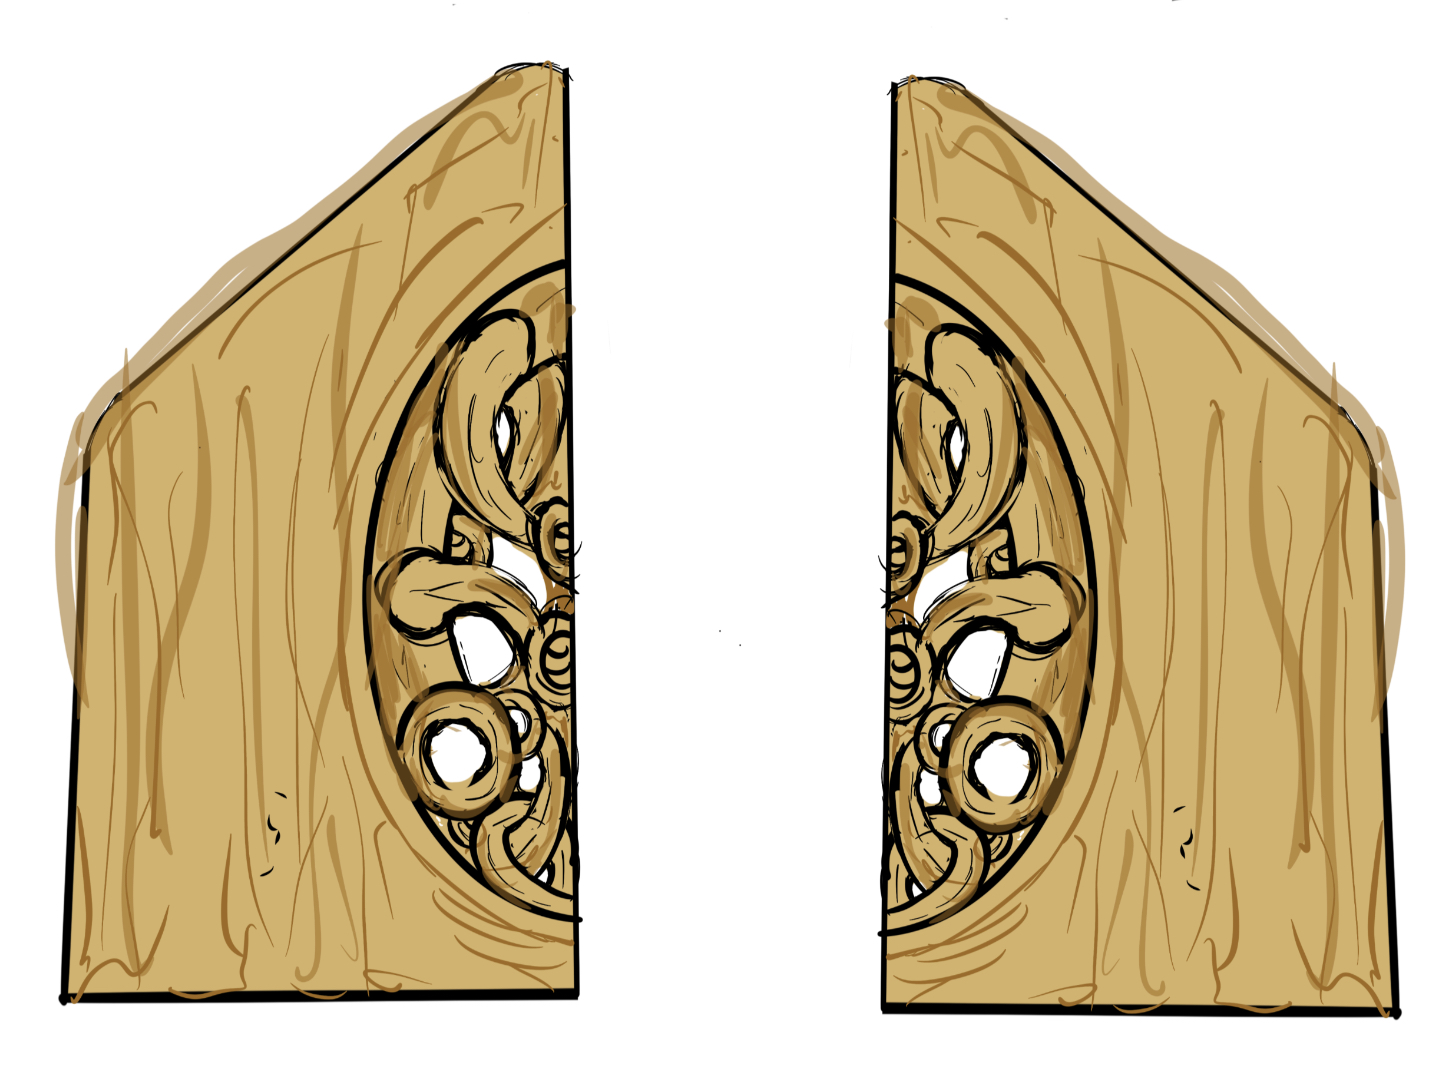 An illustration of Tiaki Dahm's carving for the Naenae Community Centre.